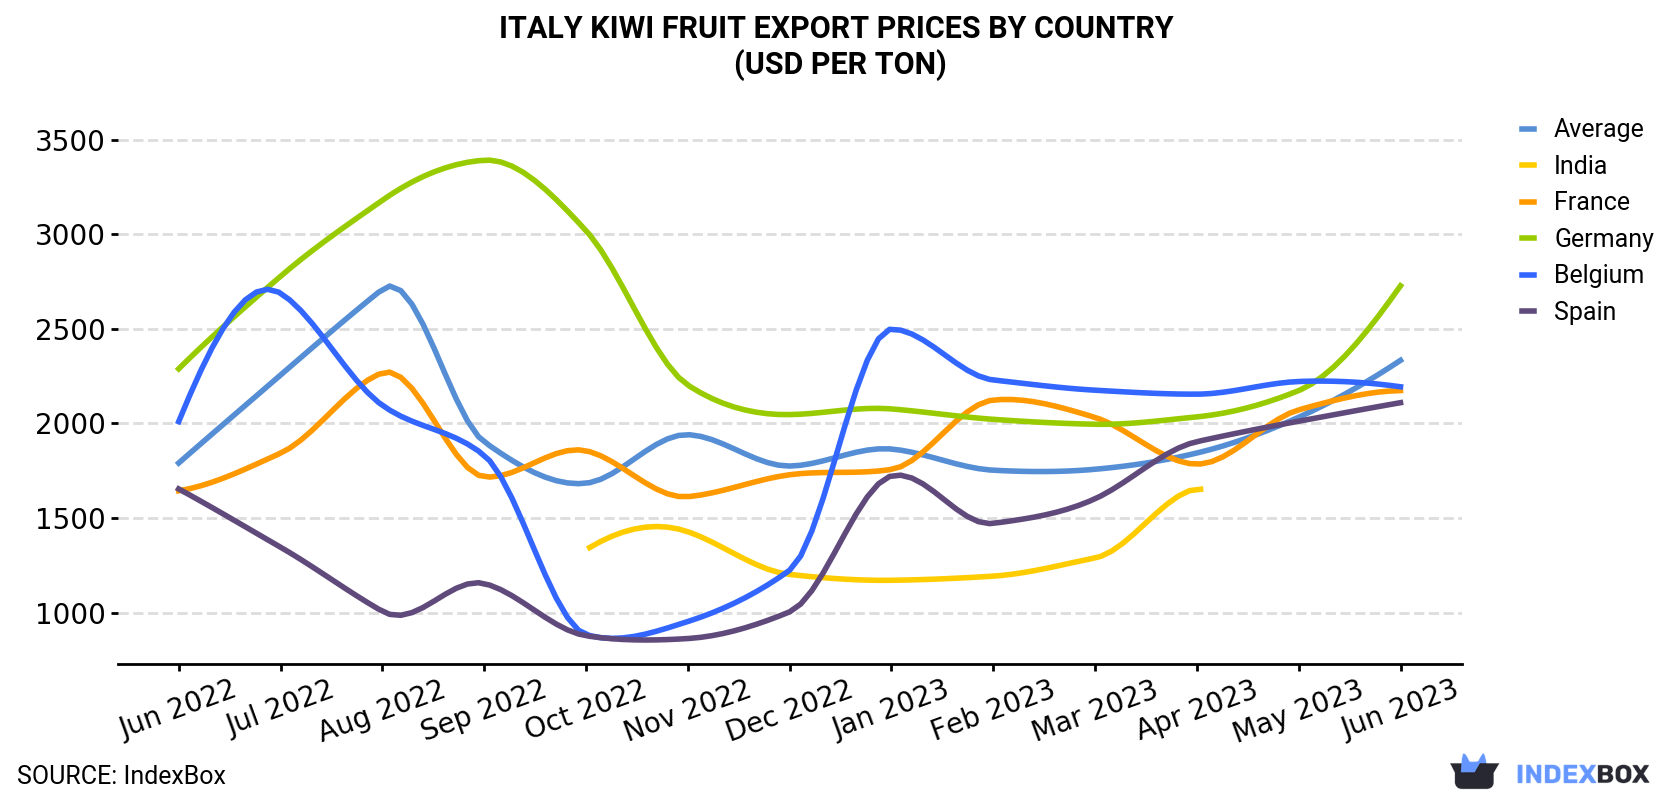 Italy Kiwi Fruit Export Prices By Country (USD Per Ton)